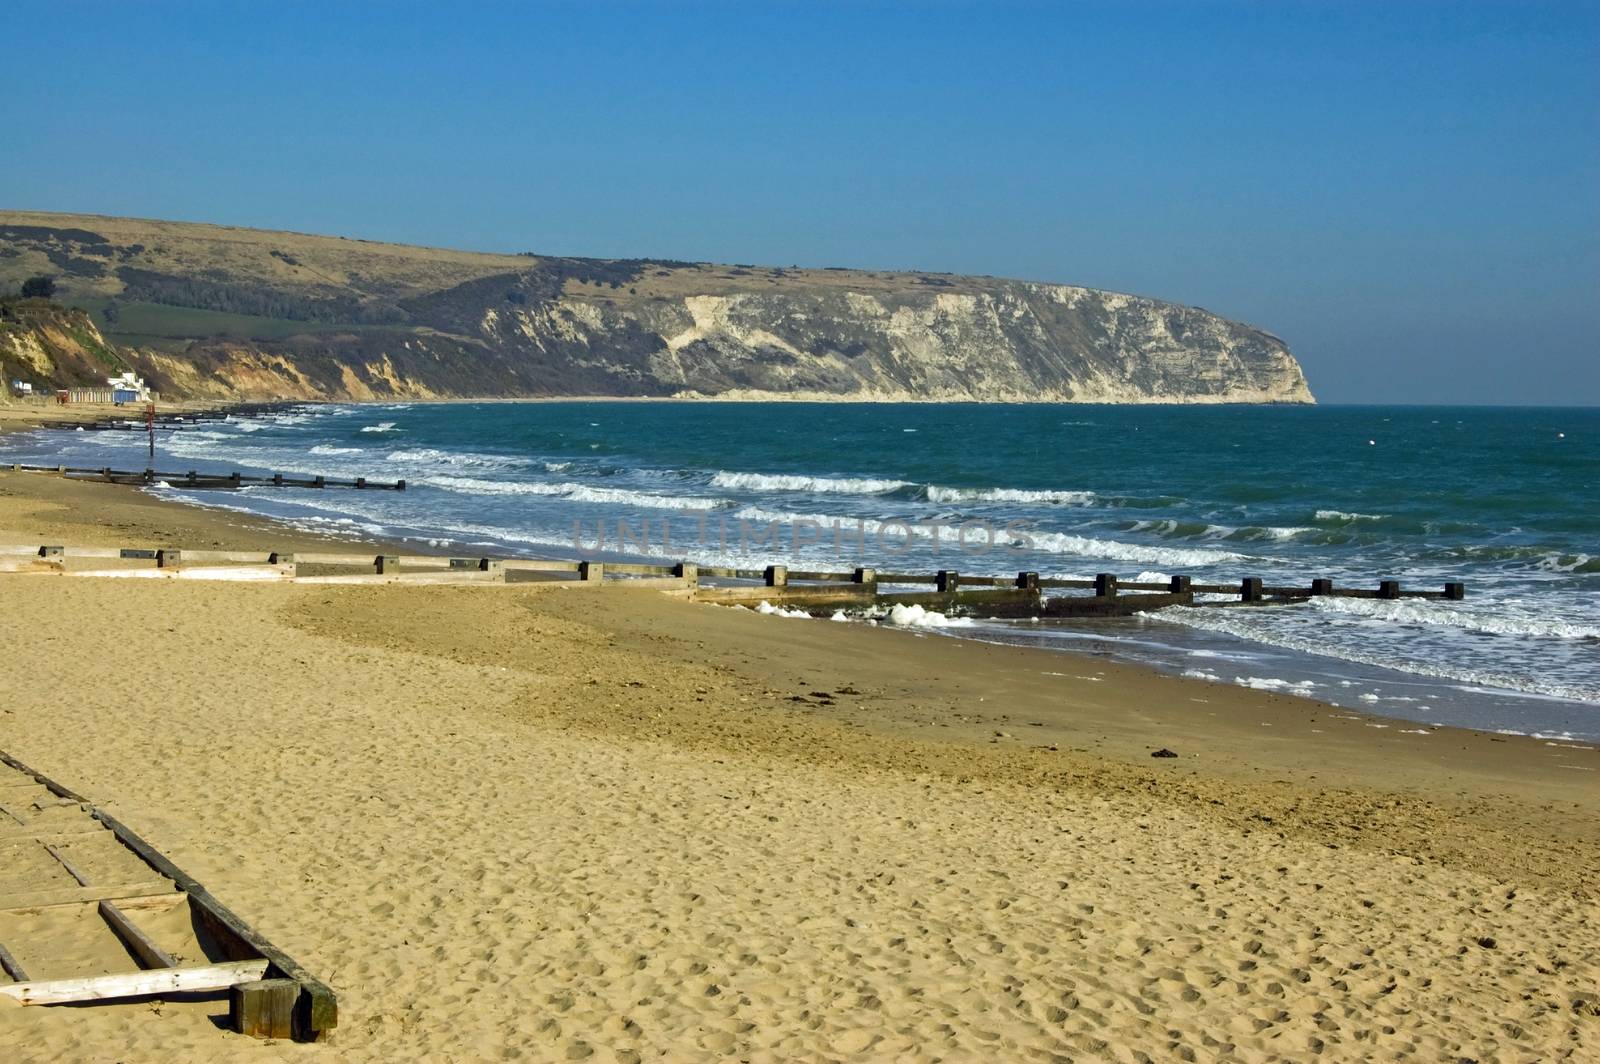 The sandy beach at the resort of Swanage, Dorset.